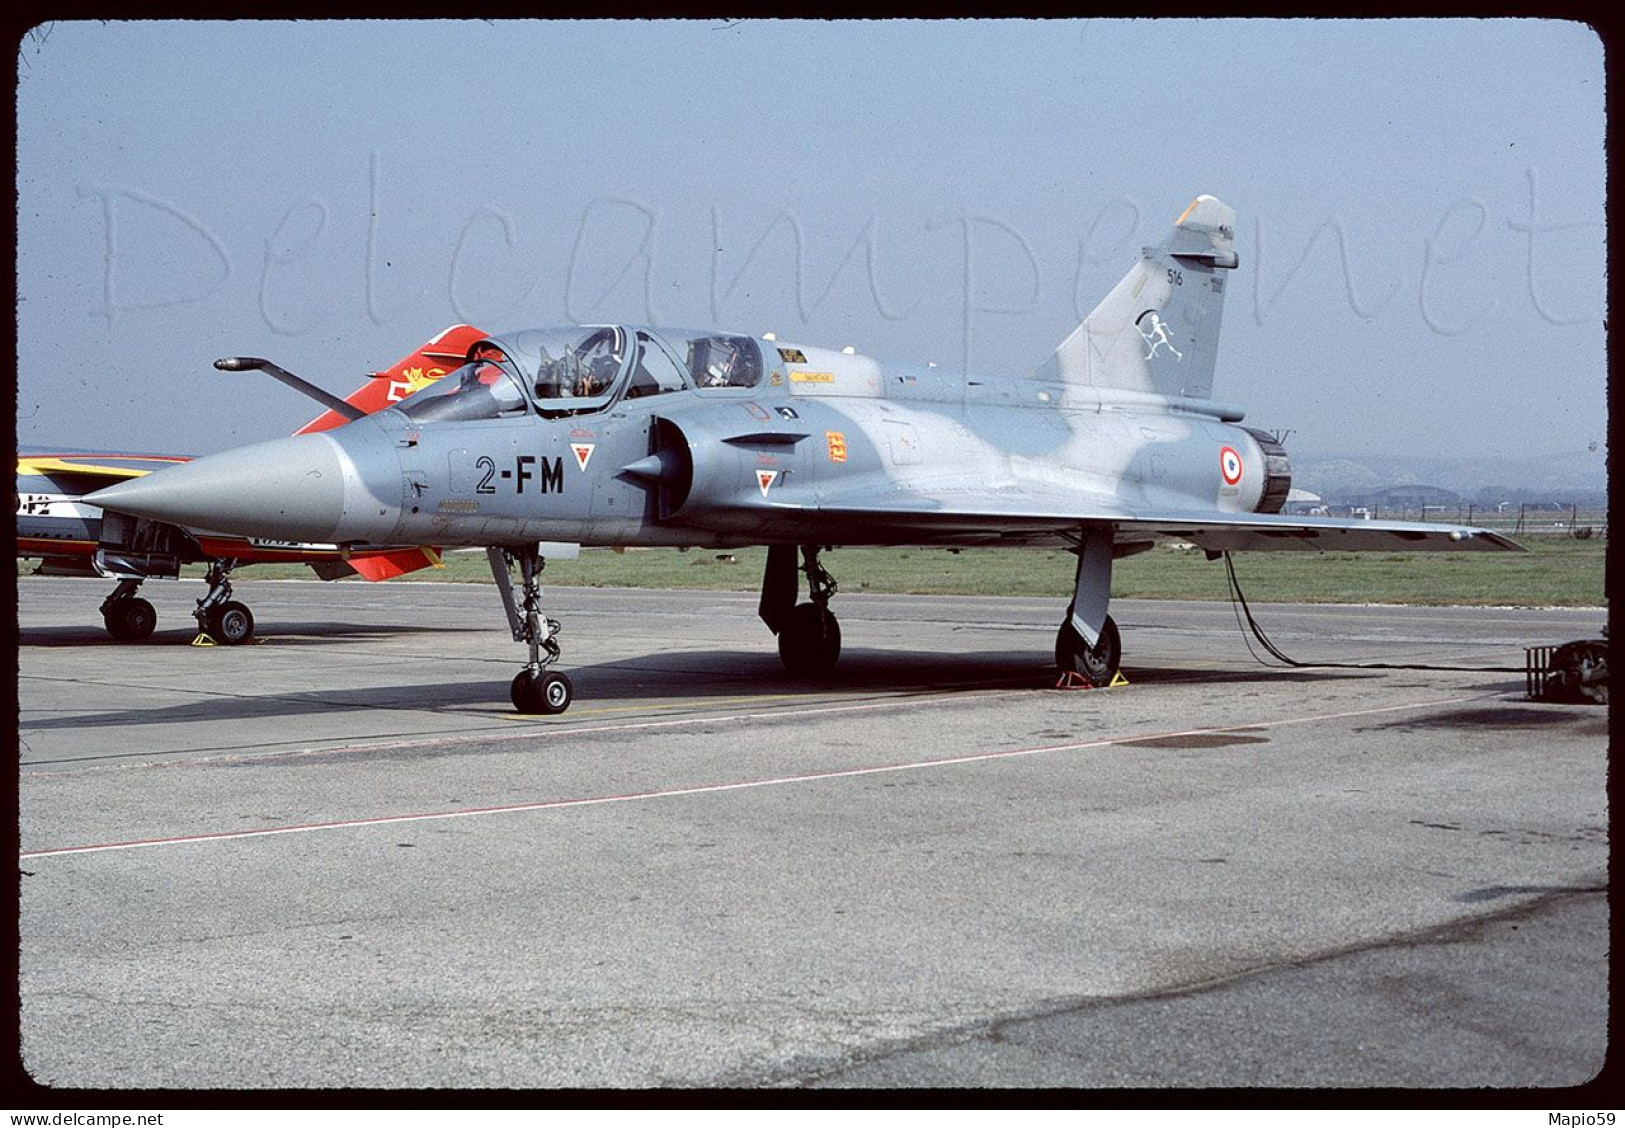 Diapositiva/Slide/Diapositive 35 Mm French AF Mirage 2000B 516 2-FM 1992 (R0032) - Aviazione